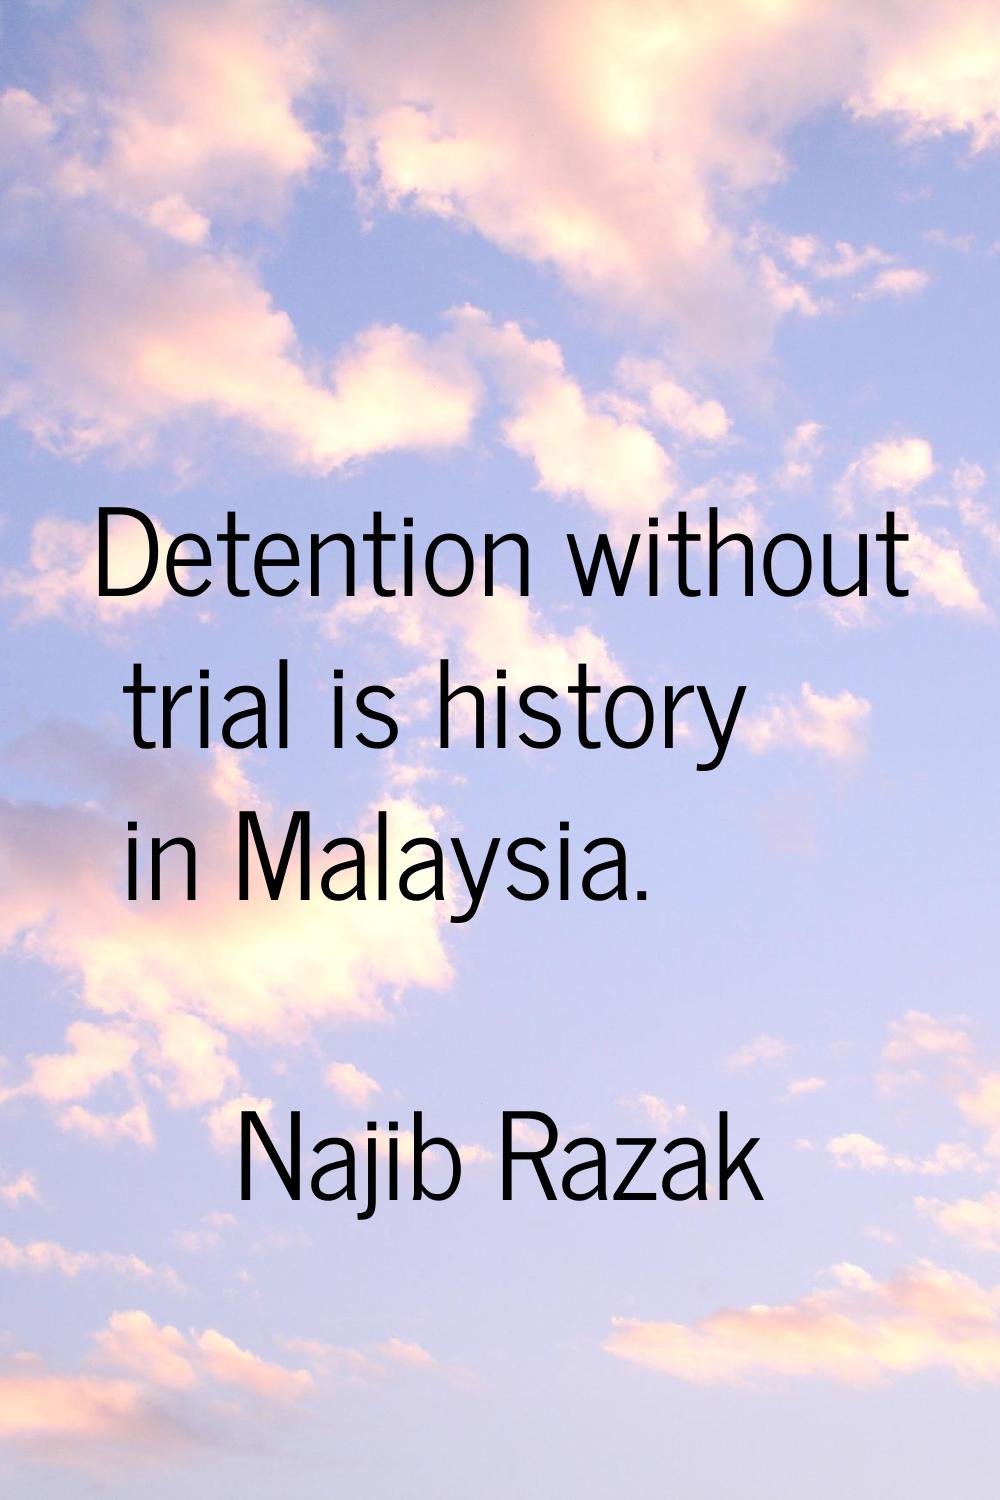 Detention without trial is history in Malaysia.